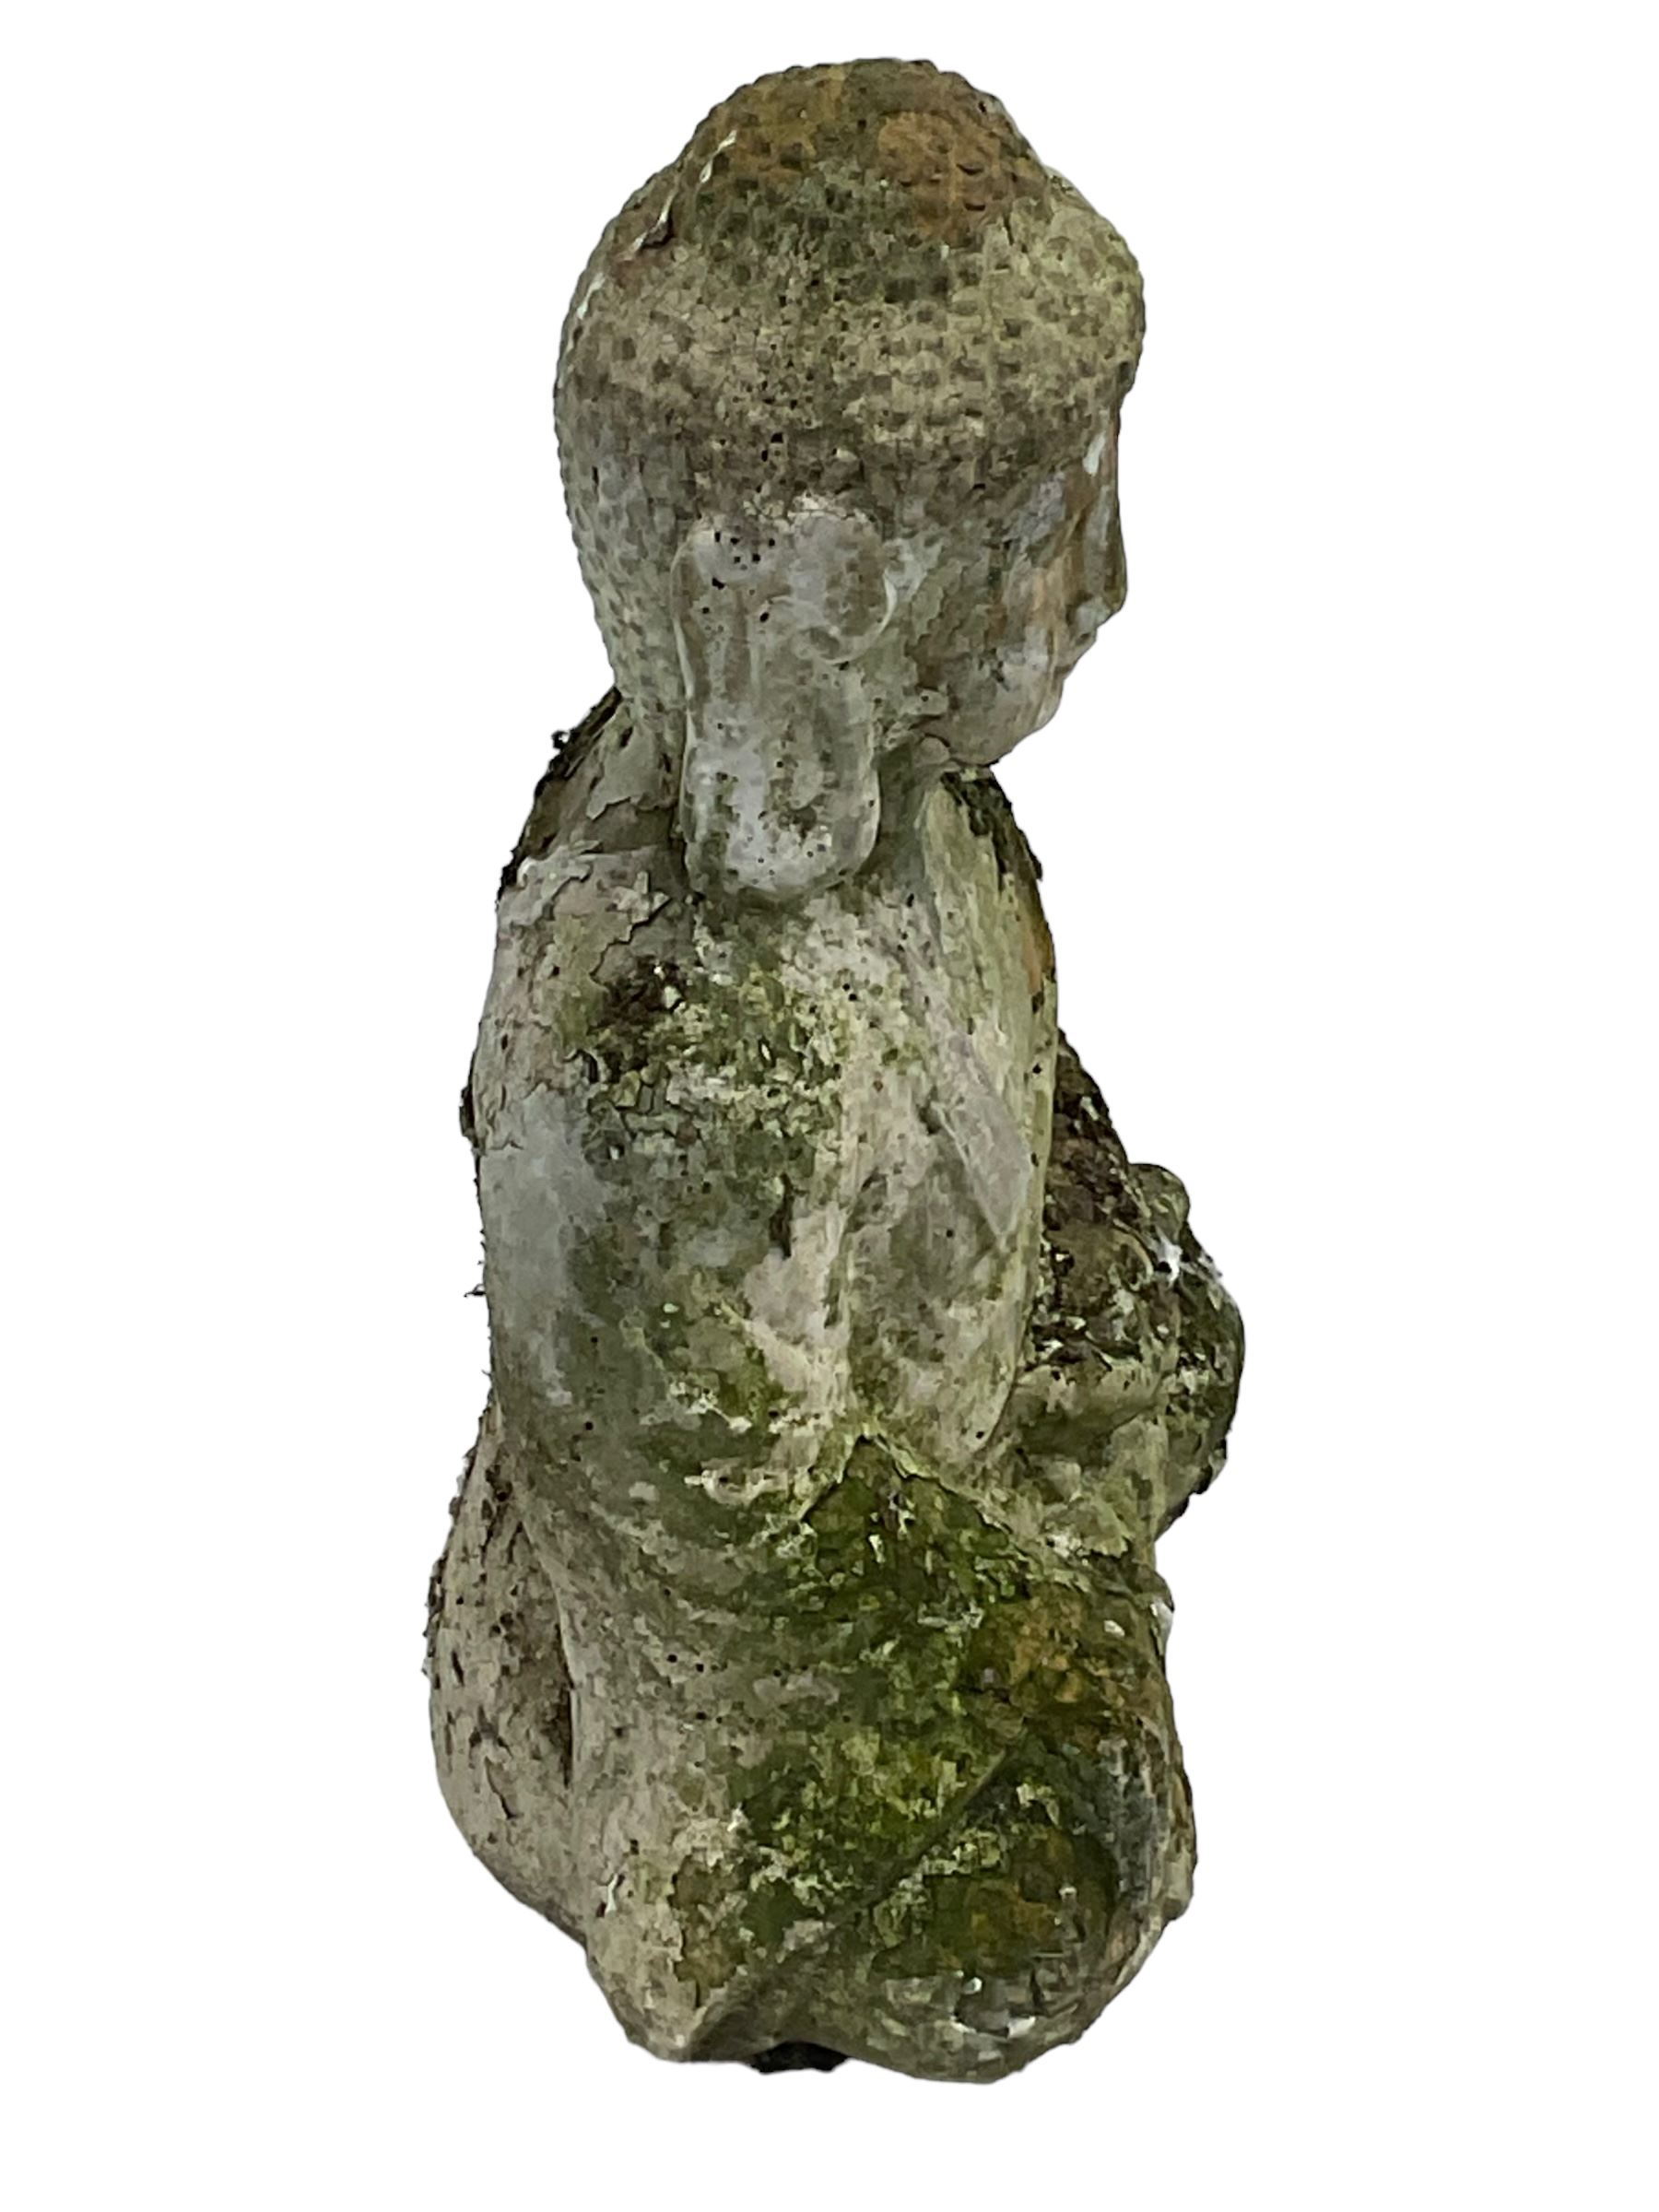 Terracotta garden figure in the form of a seated Buddha - Image 4 of 6